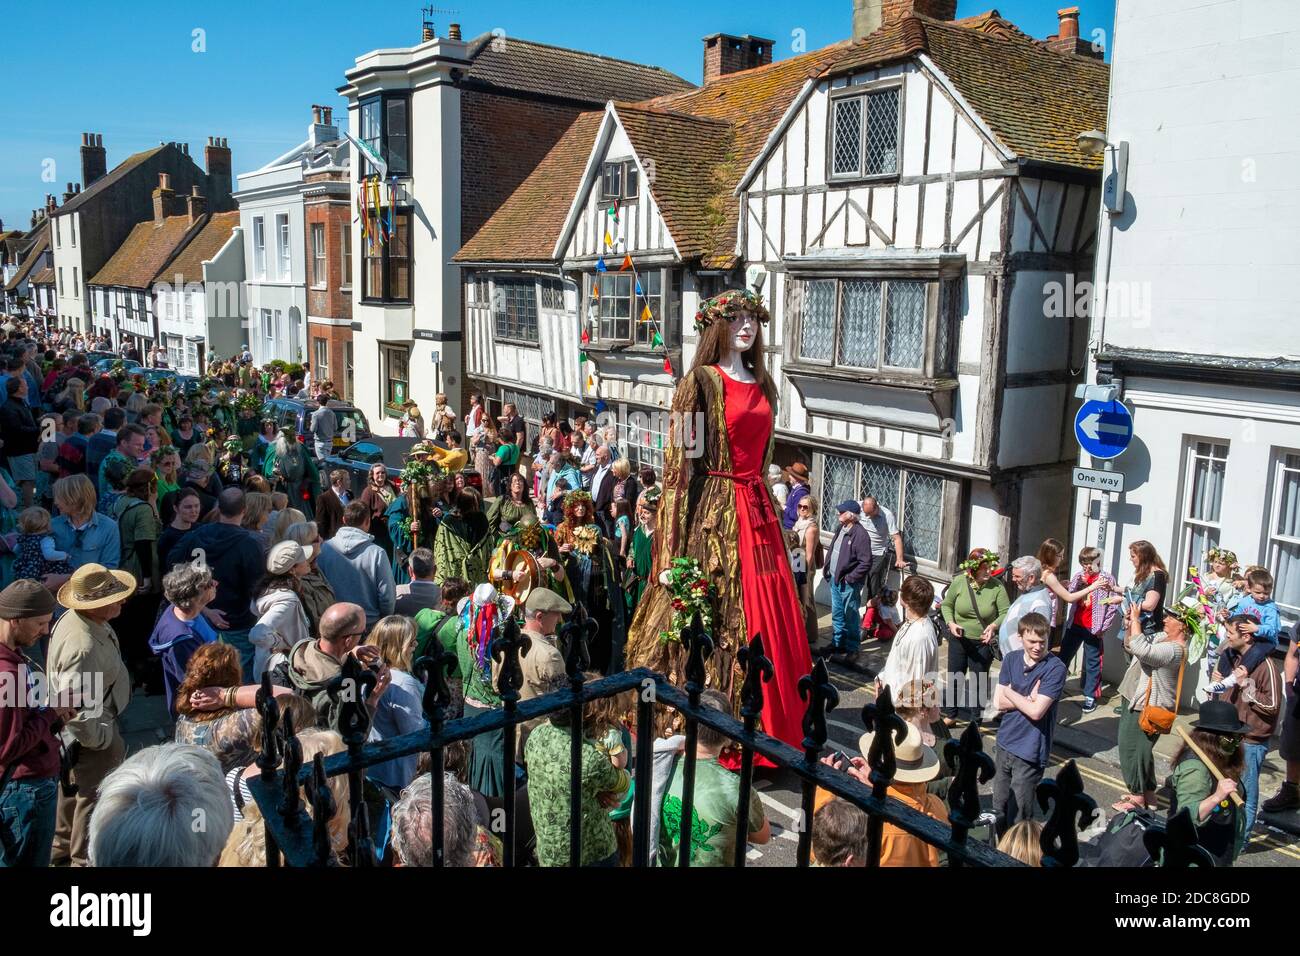 Hastings Old Town, Jack-in-the-Green, Green Man festival. Traditional May Day parade, East Sussex, UK. Crowds lining All Saints Street. Stock Photo